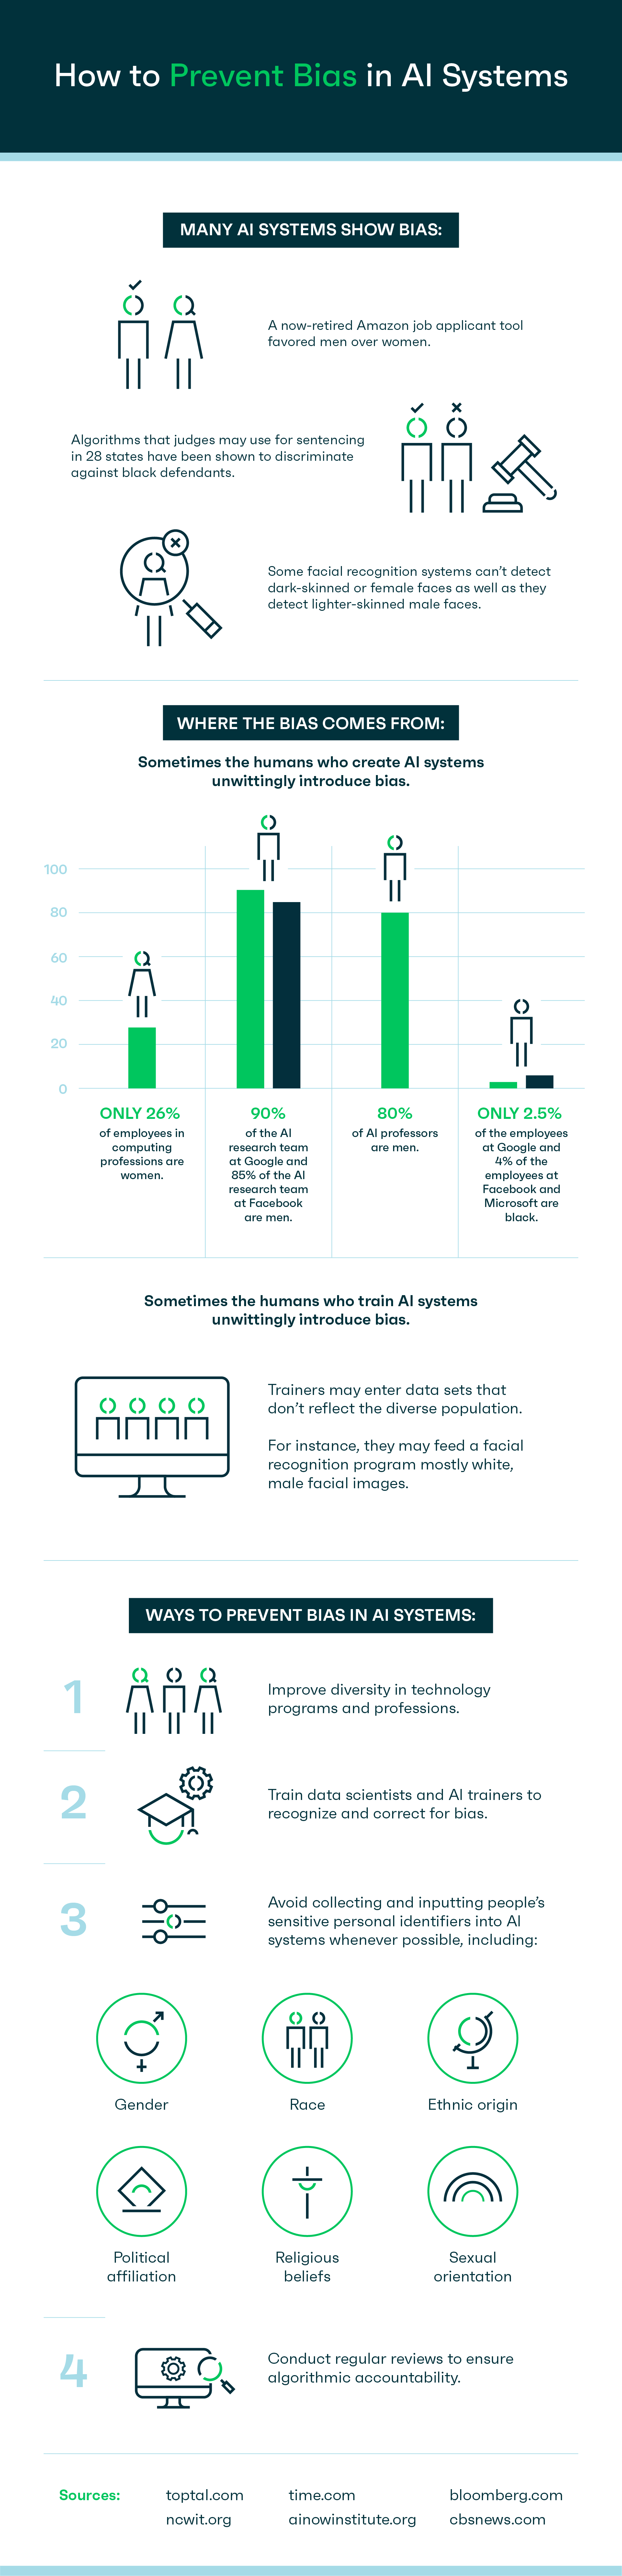 Infographic showing how to prevent bias in A.I. systems